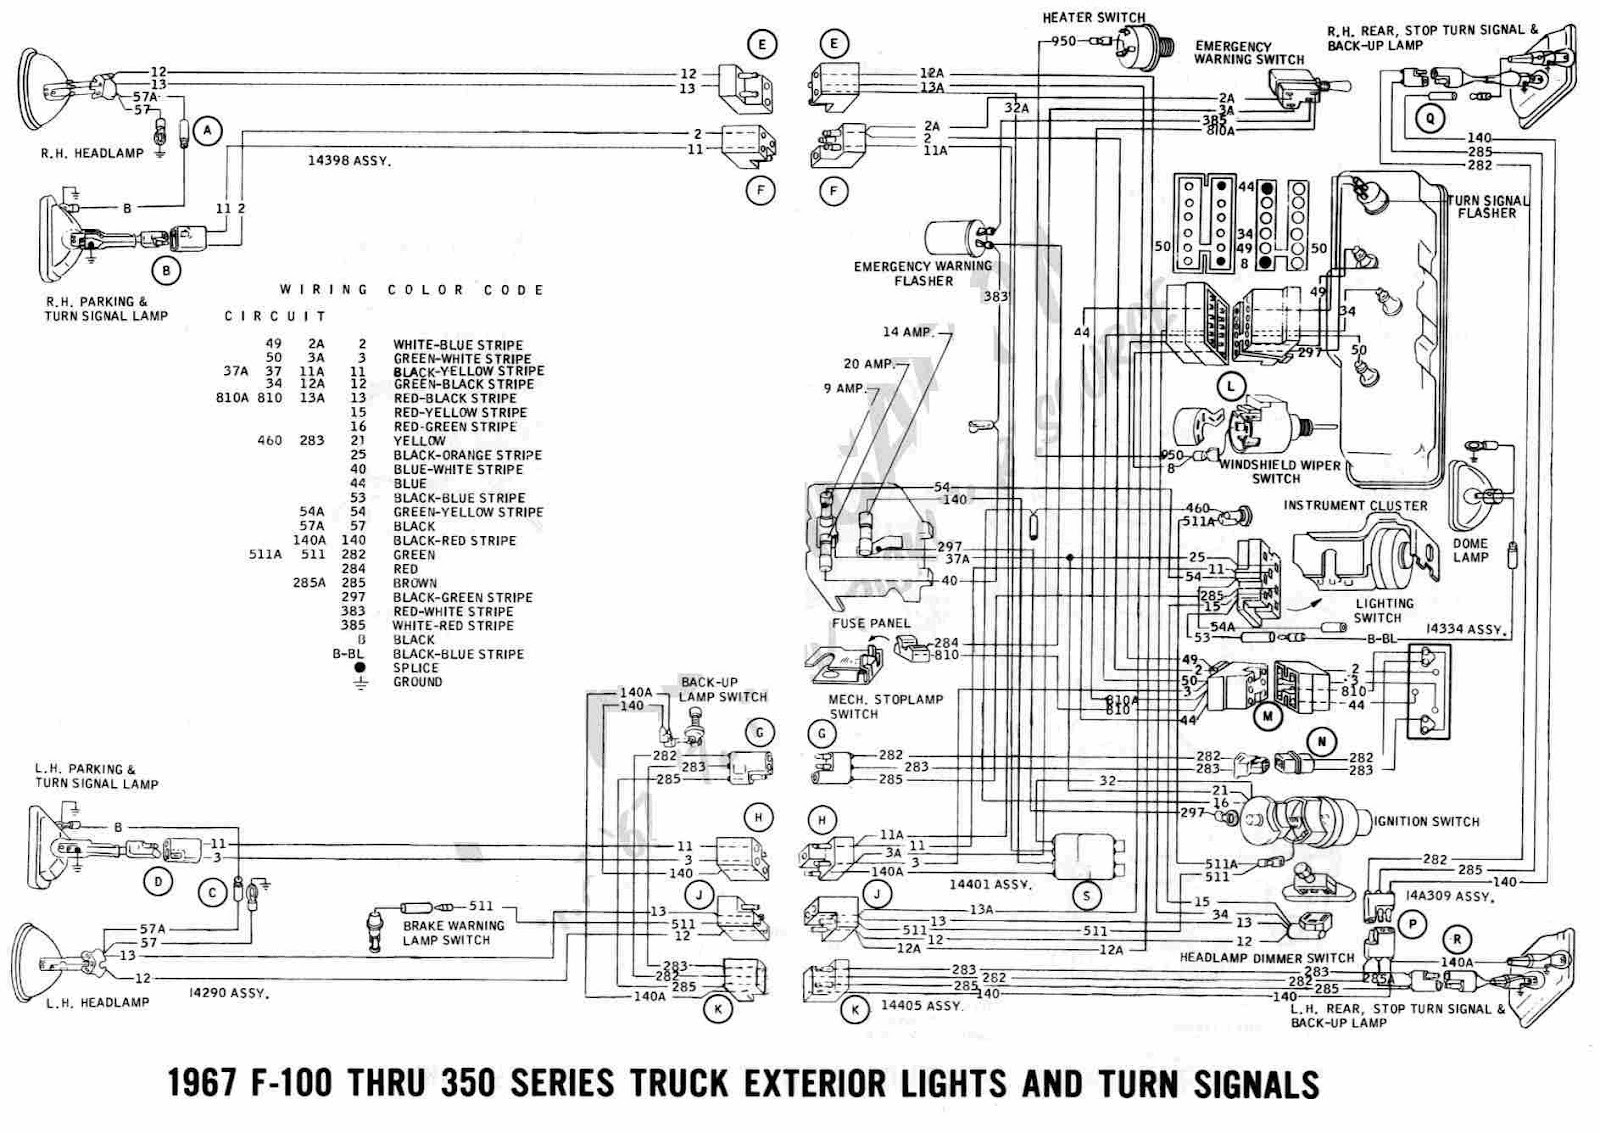 Ford F 100 Through F 350 Truck 1967 Exterior Lights and Turn Signals Wiring Diagram